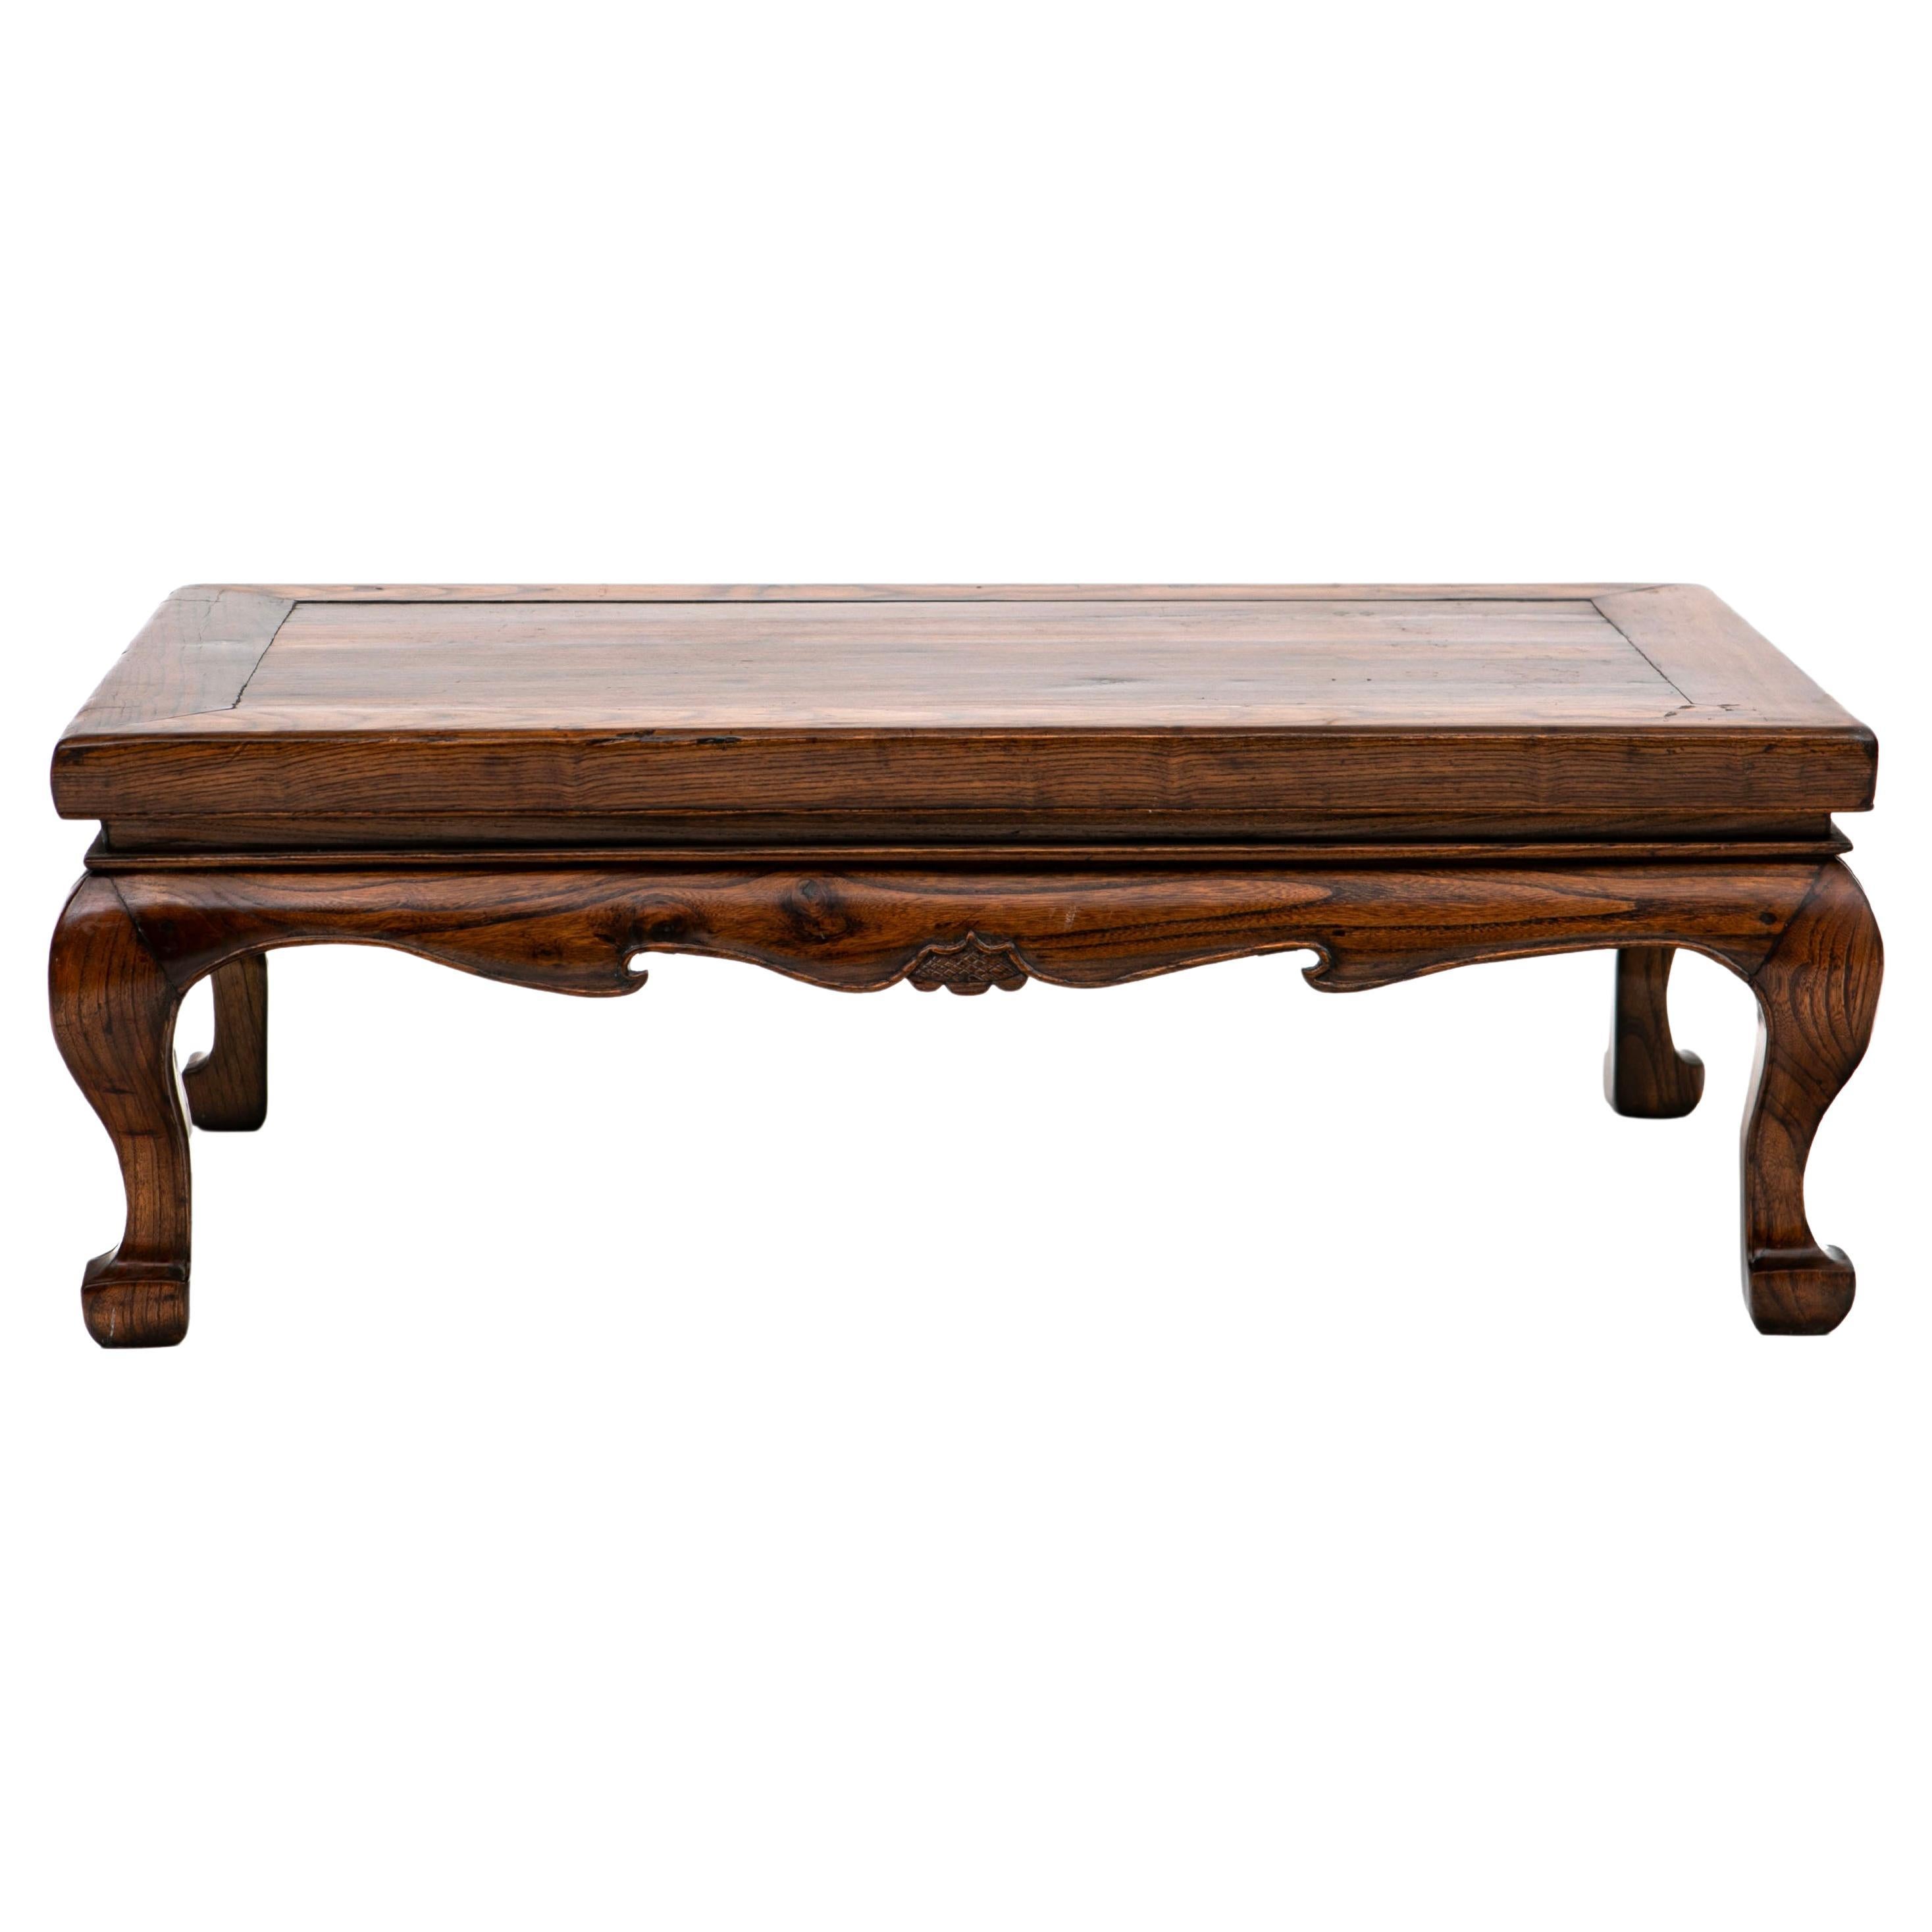 Chinese Mid 19th Century Qing Dynasty Kang Table